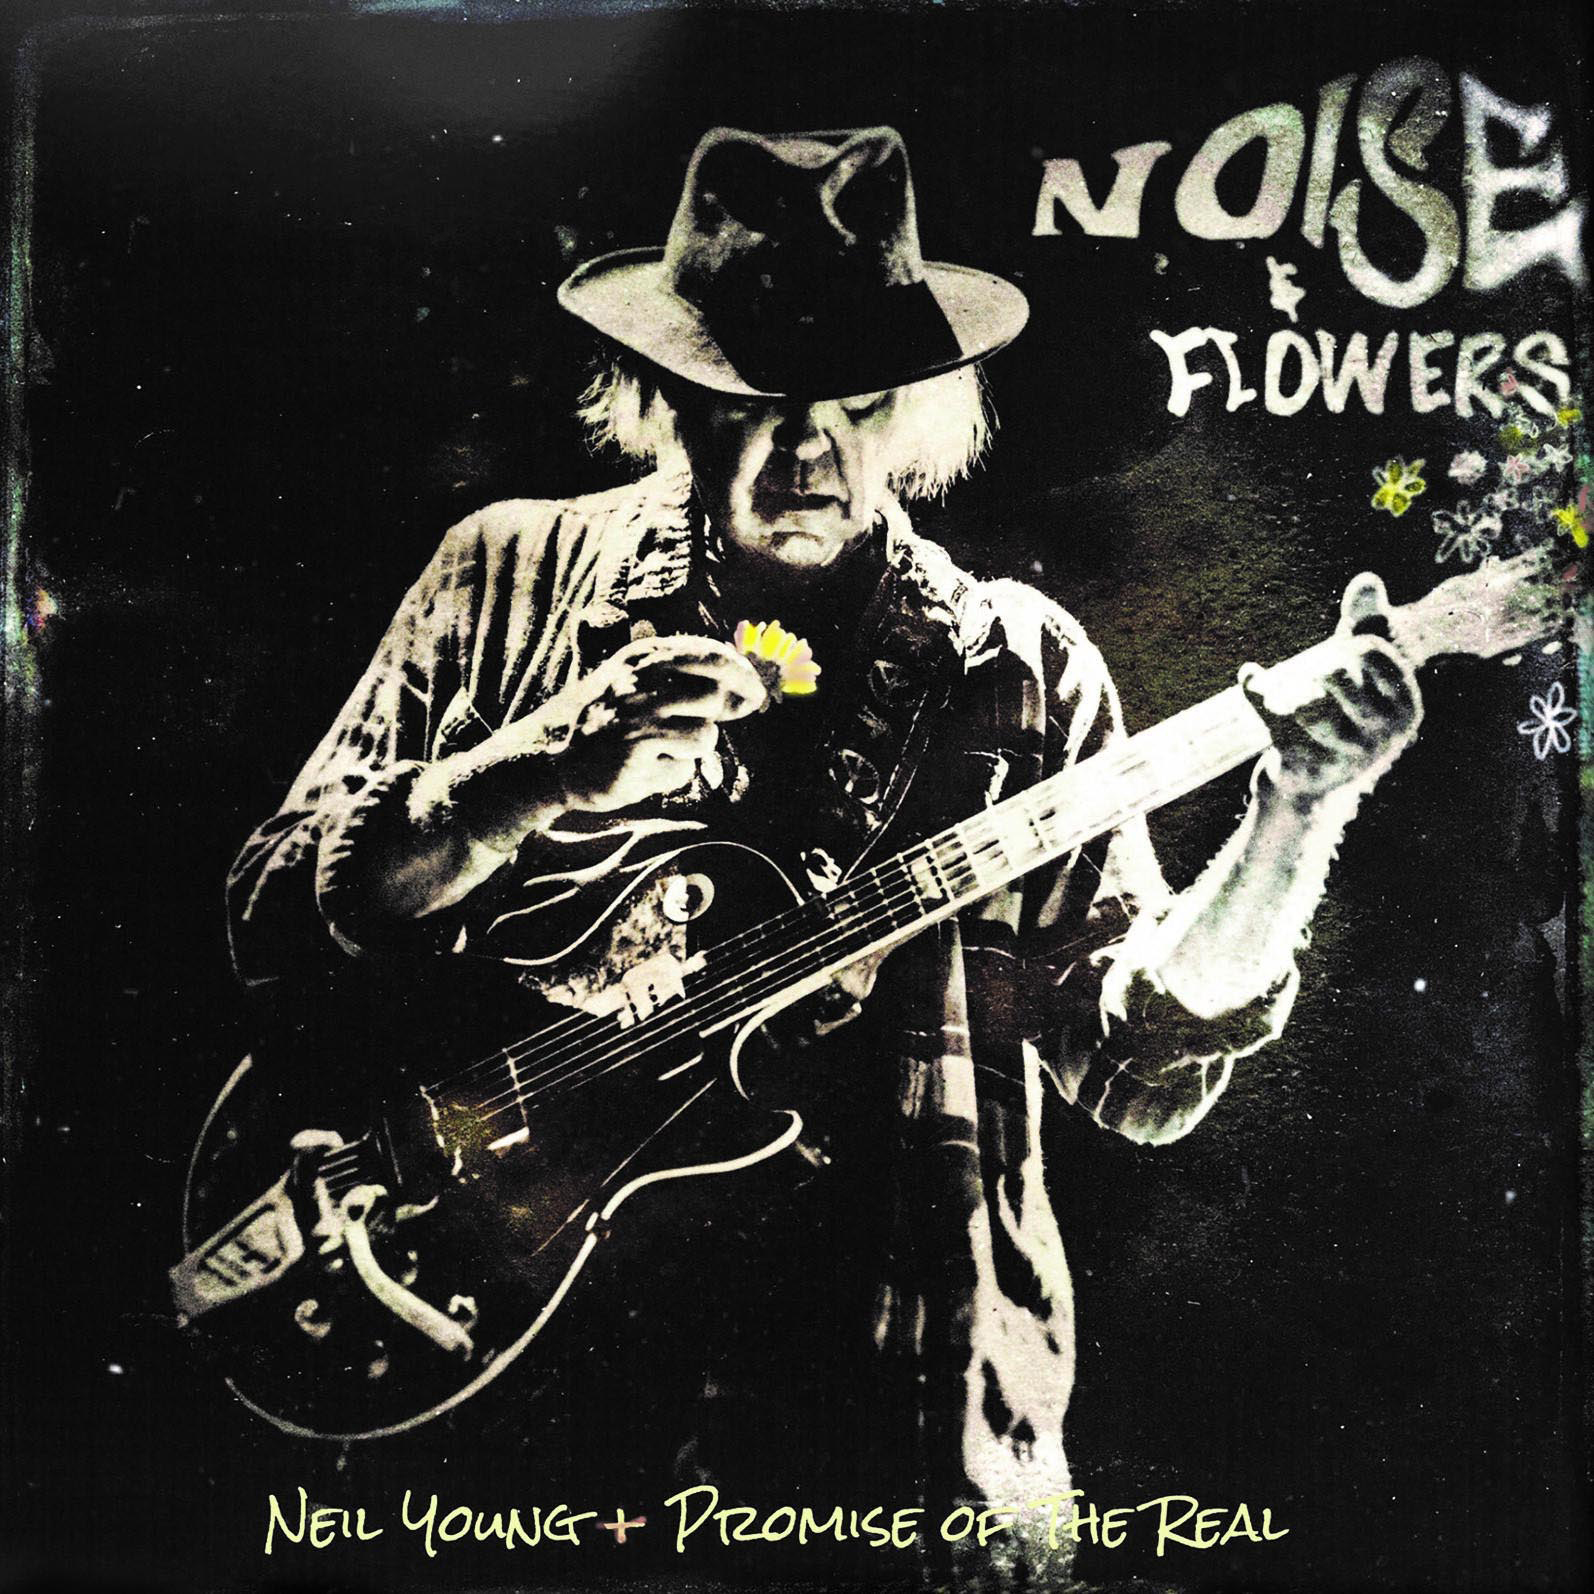 Neil Young + Promise Of NOISE And - The - (Box Real FLOWERS set)